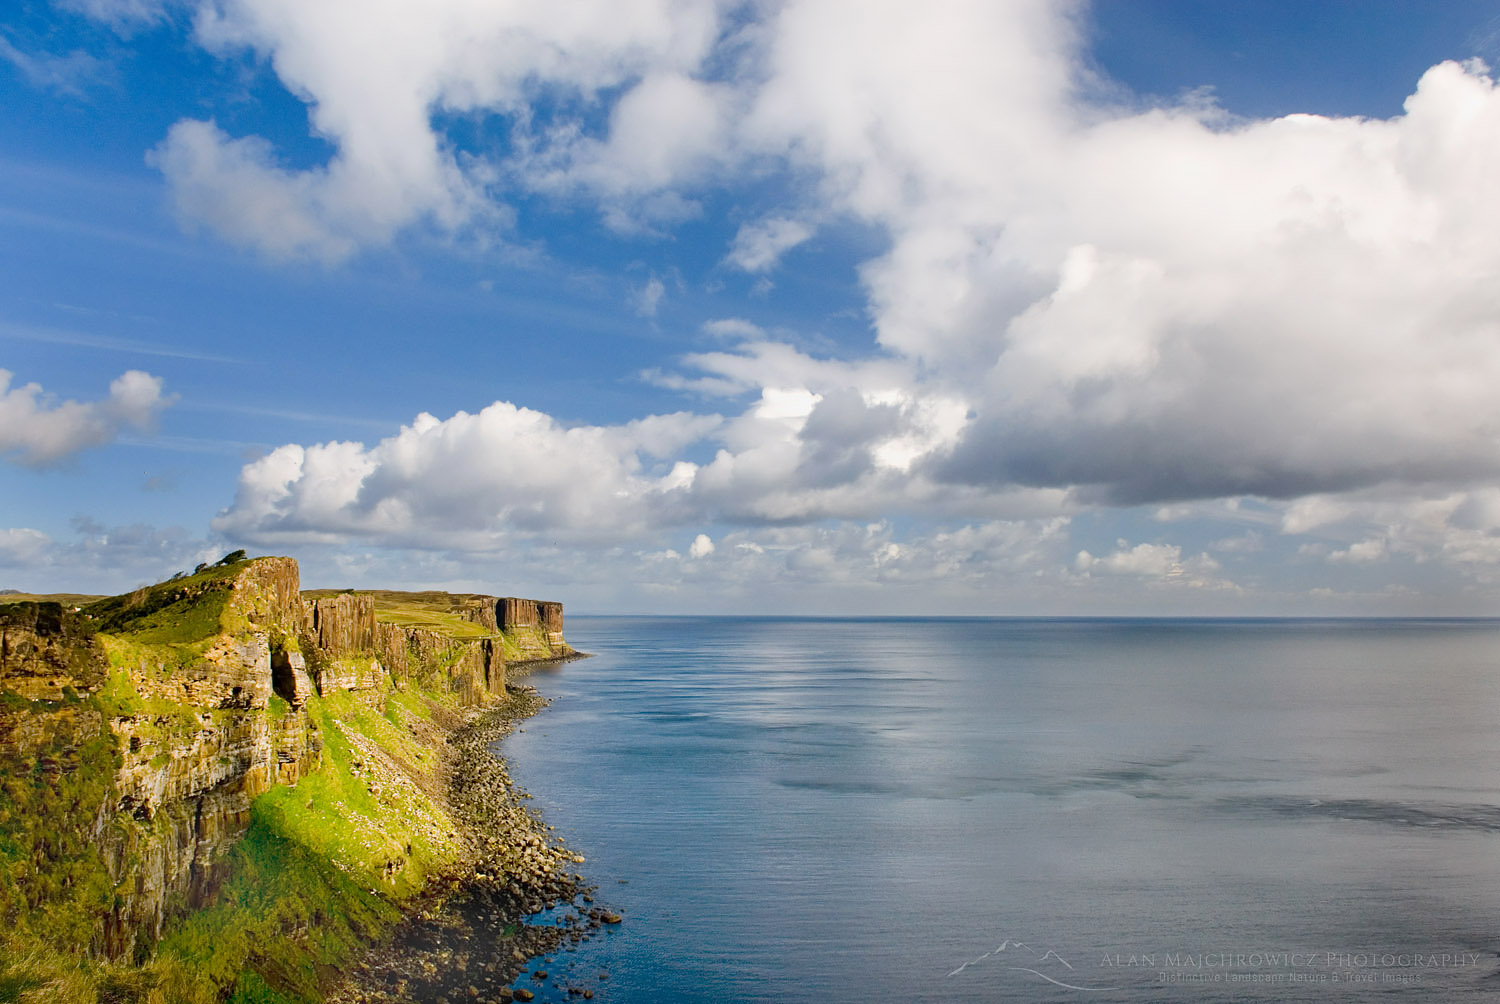 Dunite cliffs on the coast of Isle of Skye Scotland, Kilt Rock is in the distance #11935